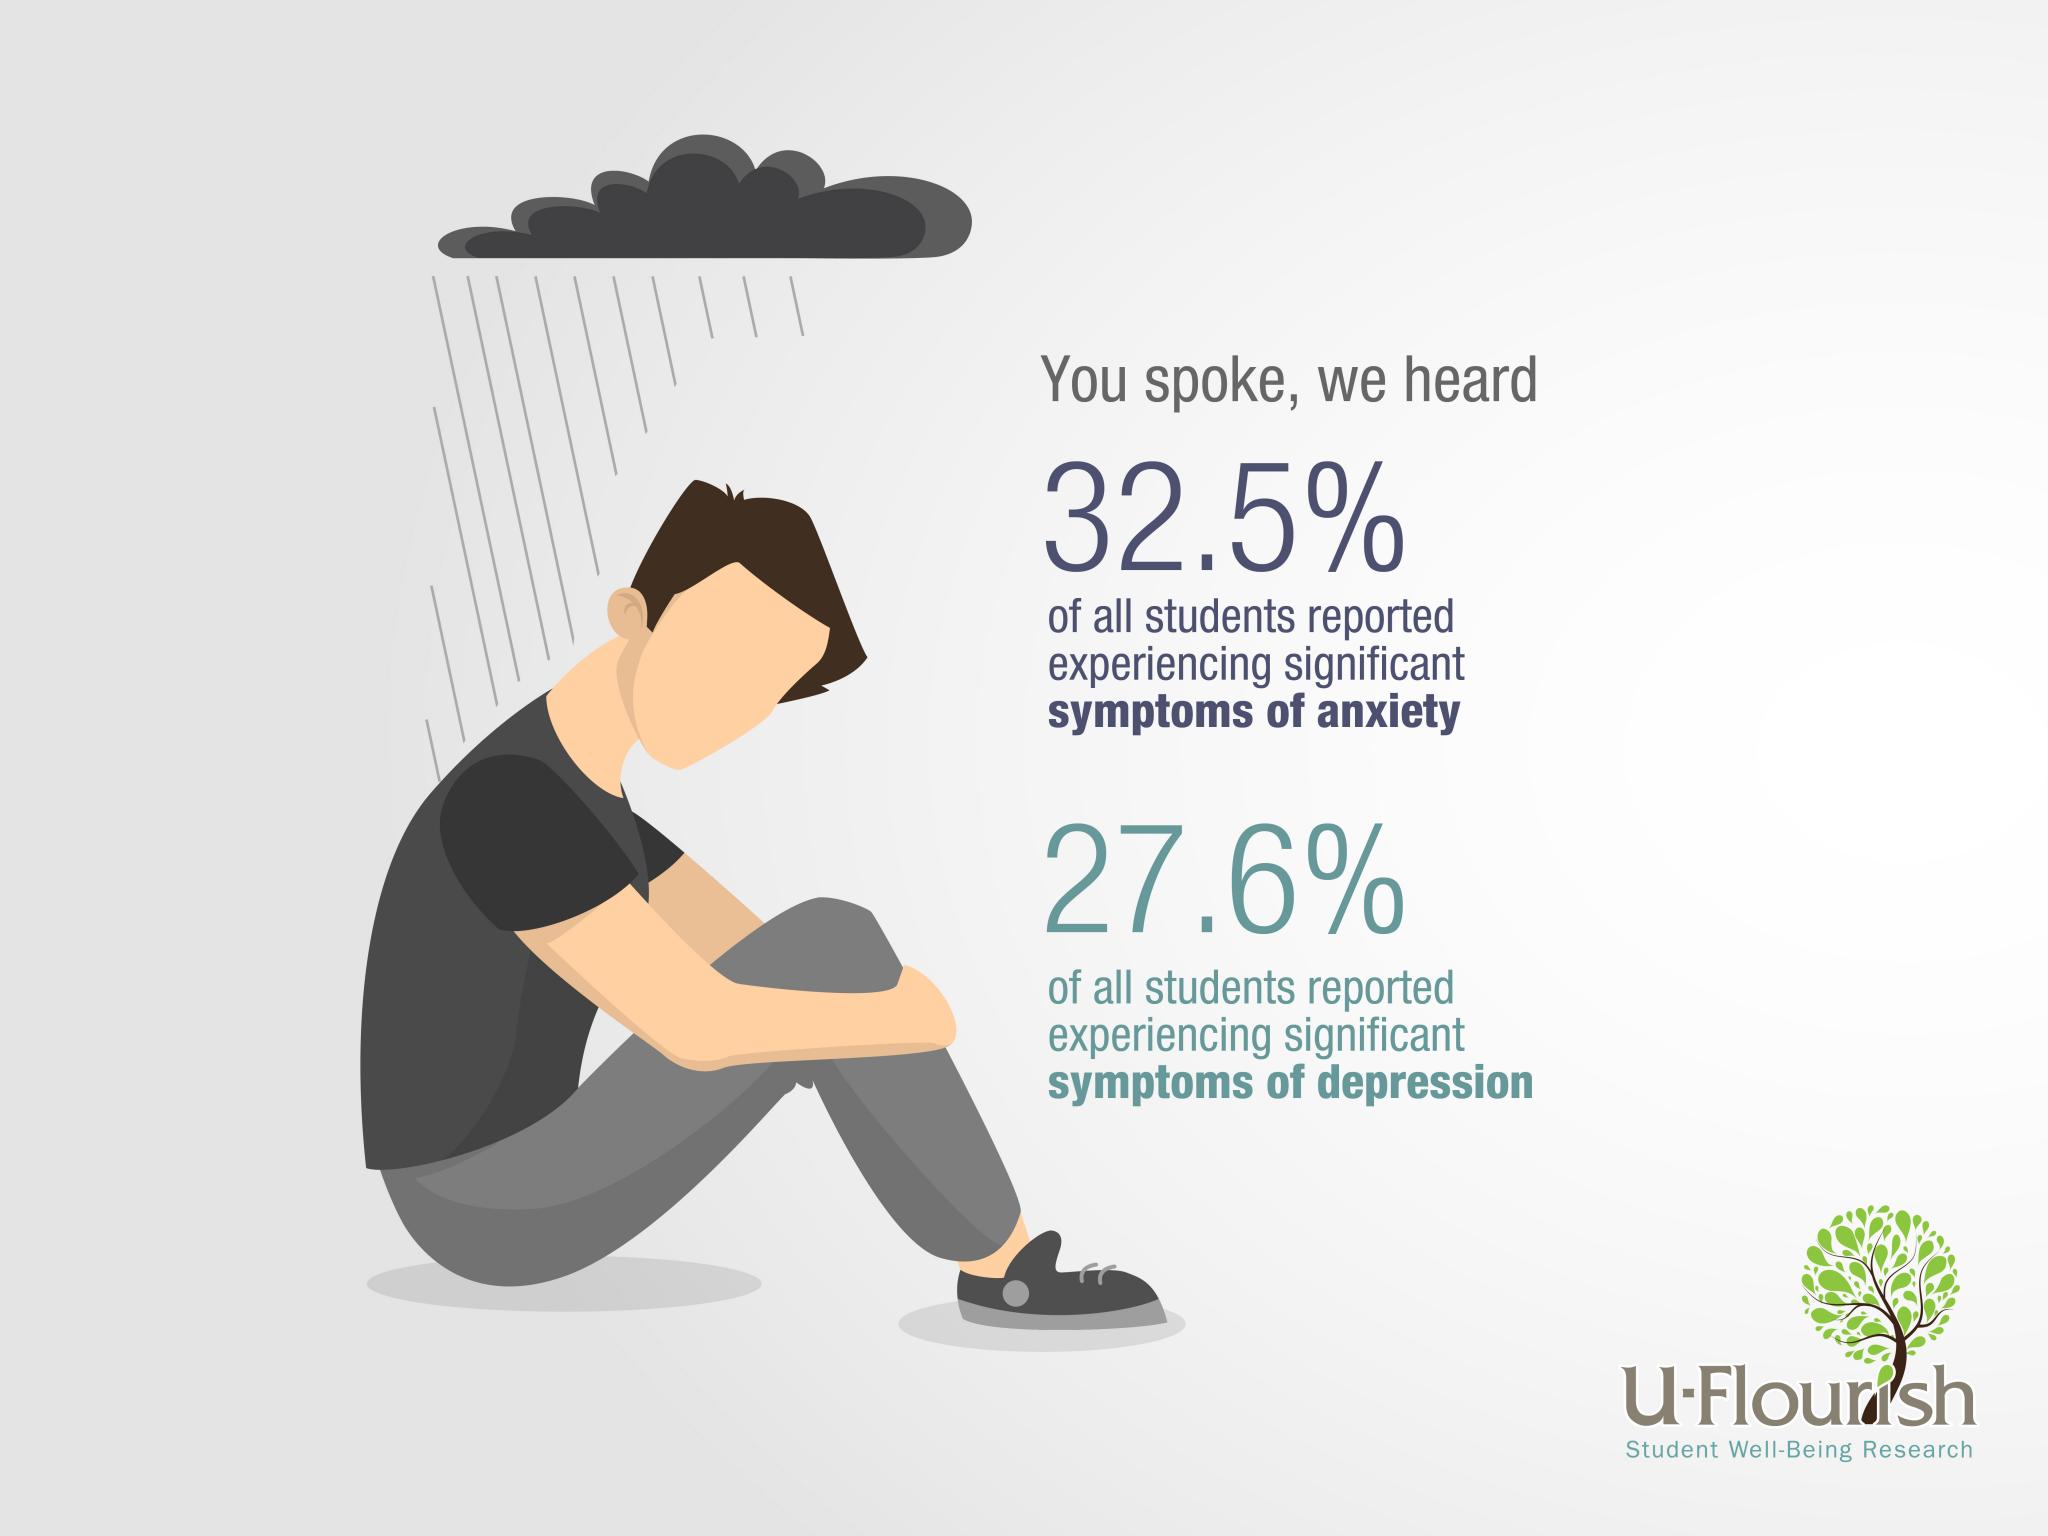 You spoke, we heard 32.5% of all students reported experiencing significant symptoms of anxiety. 27.6% of all students reported experiencing significant symptoms of depression